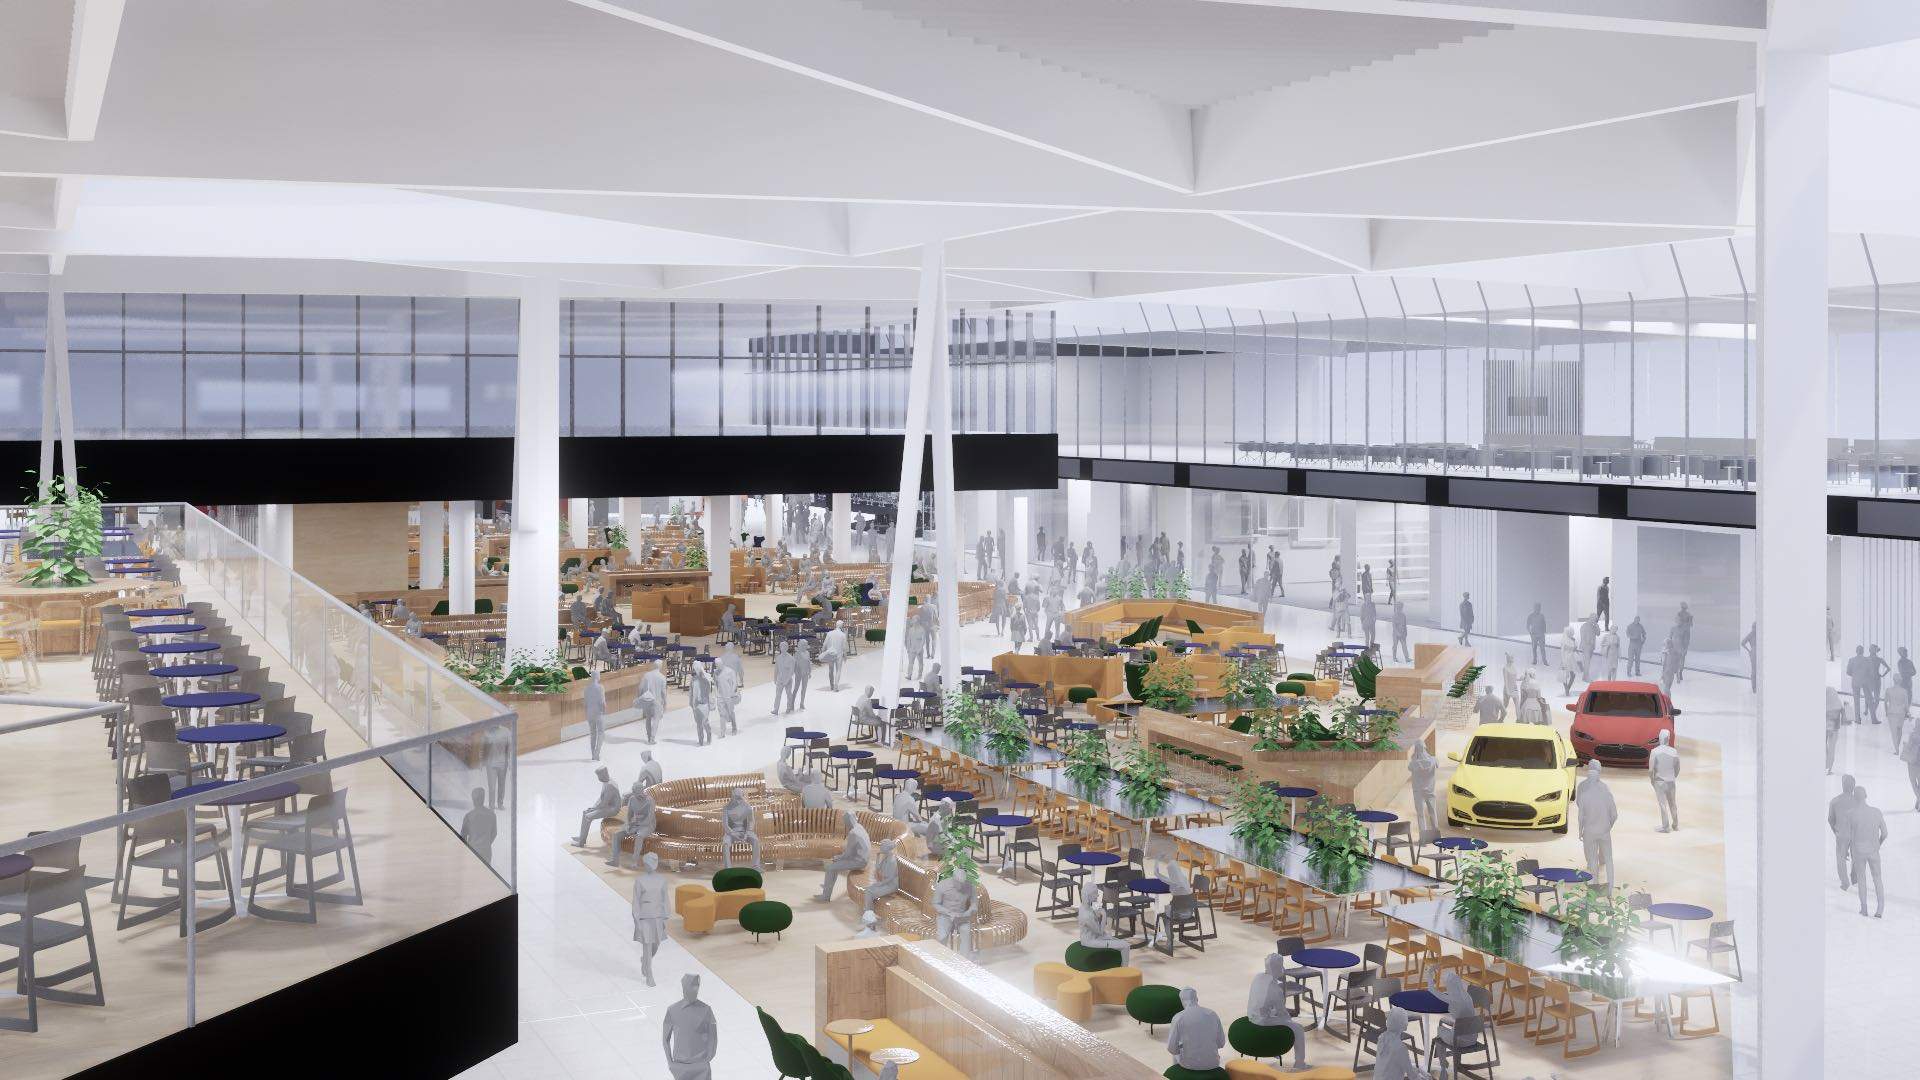 Melbourne Airport Could Score a New Rooftop Bar and Restaurant as Part of Its $500 Million Makeover